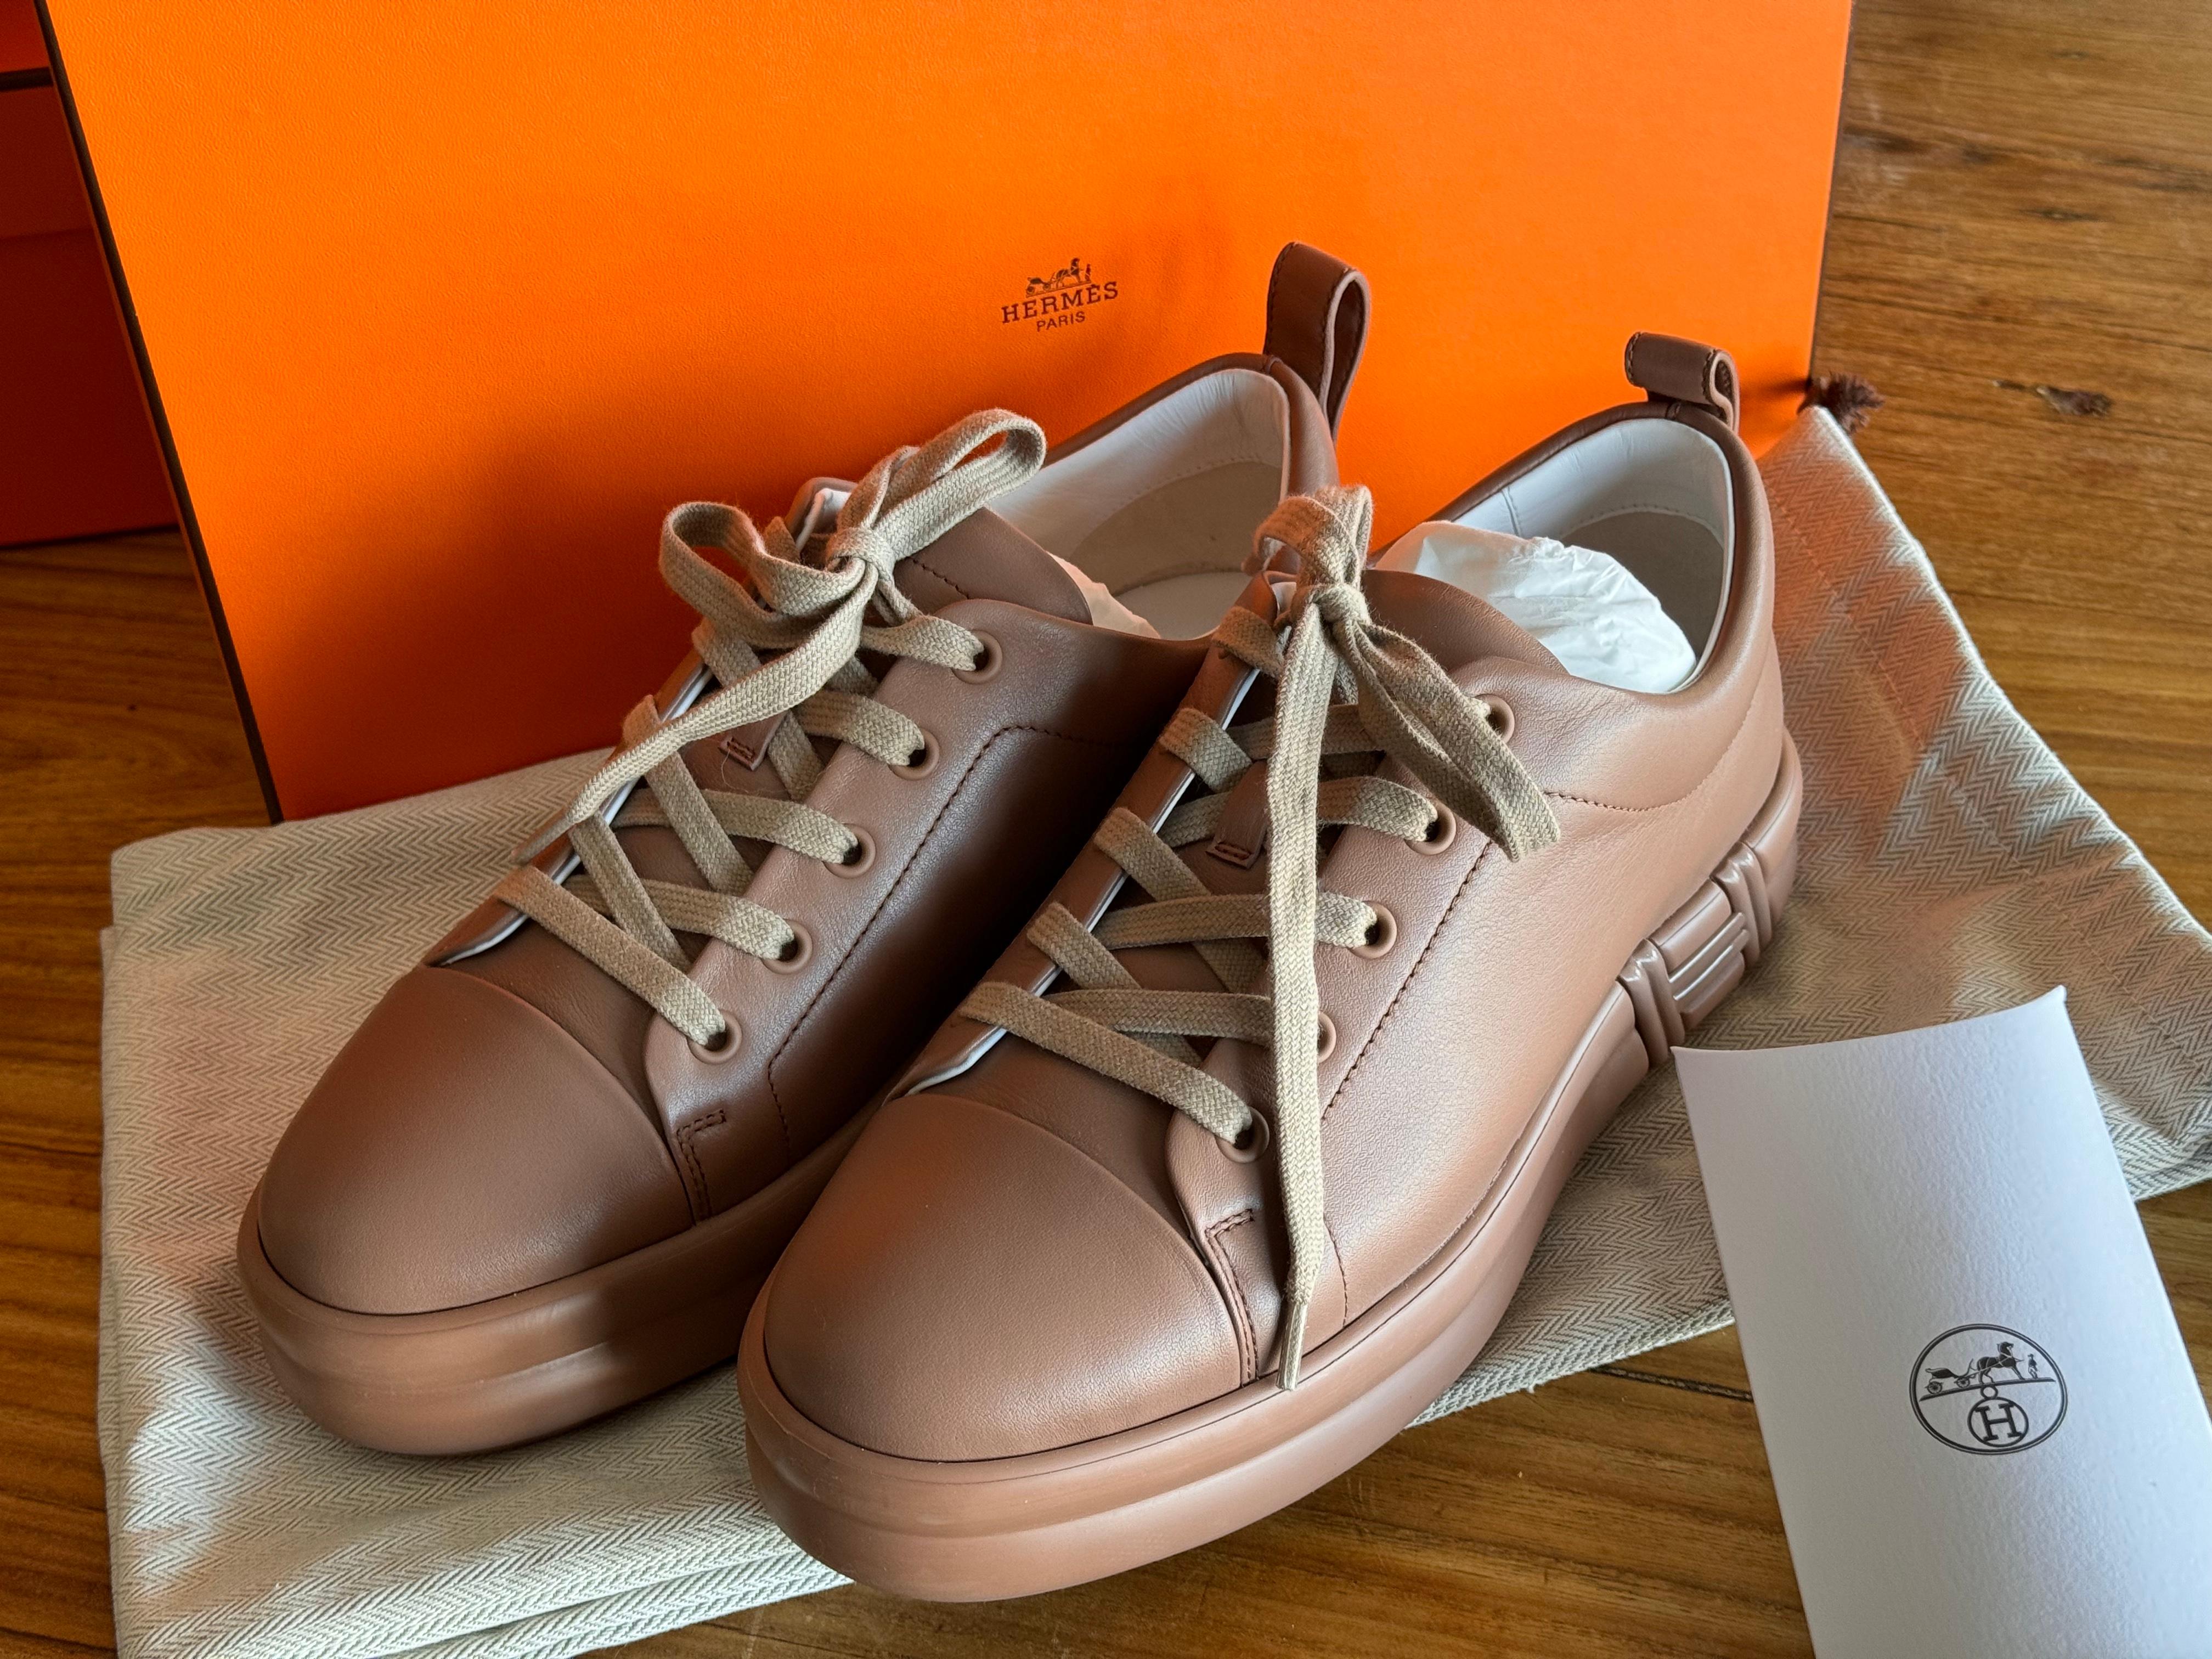 Introducing Hermes’ luxurious leather sneaker, the Femme Happy, in the exquisite Rose Perle color, now available in size 38. Each pair is meticulously presented in its original box, complete with a dust bag for storage and an extra set of shoelaces